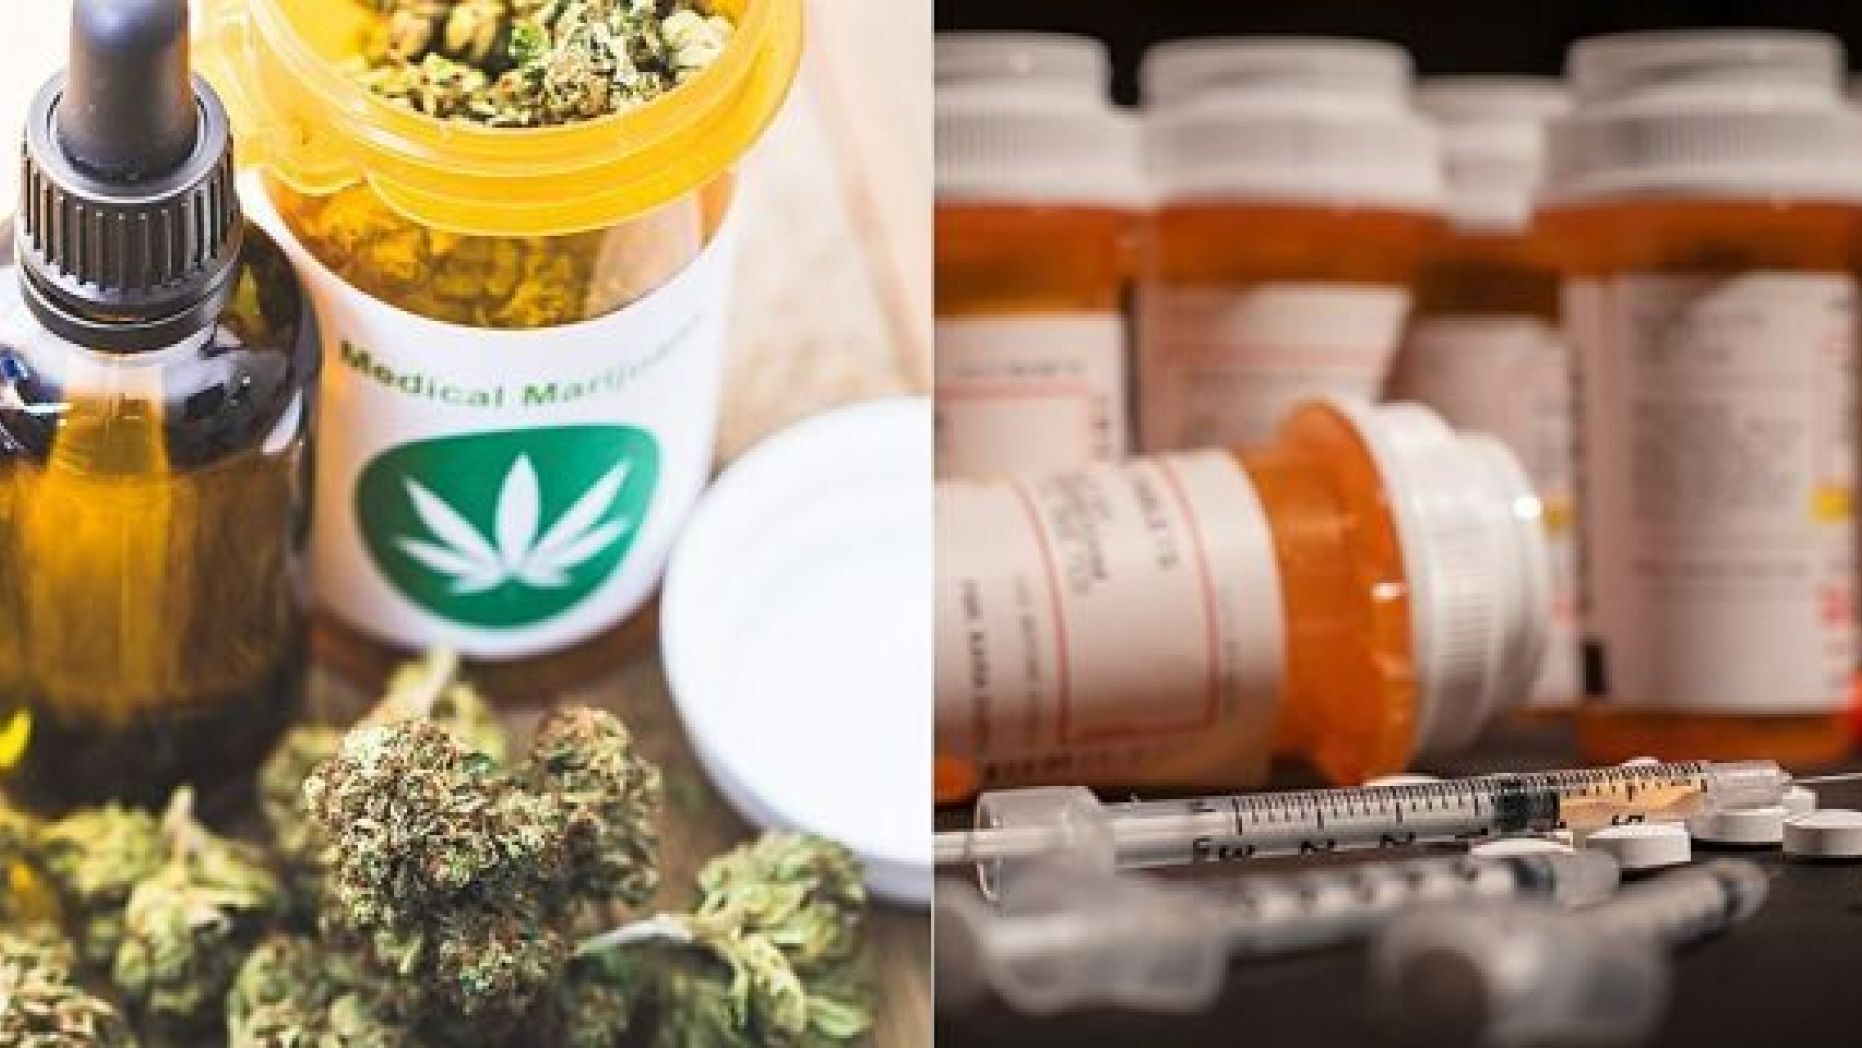 Colorado signed a bill on Thursday which will allow doctors to recommend medical marijuana to treat conditions they've previously used painkillers for.